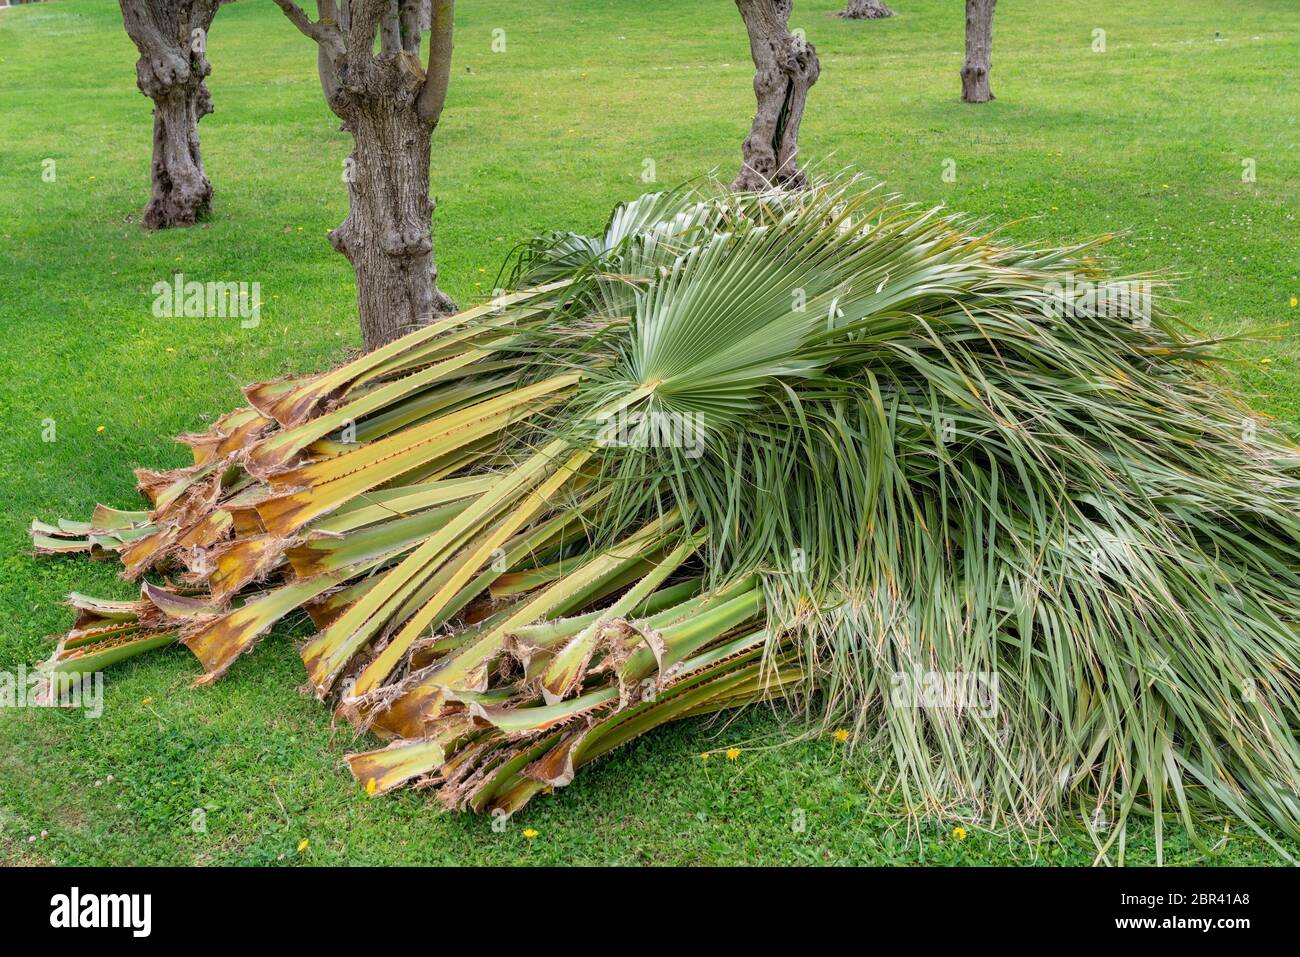 Old cut palm leaves lying on the green grass. Stock Photo